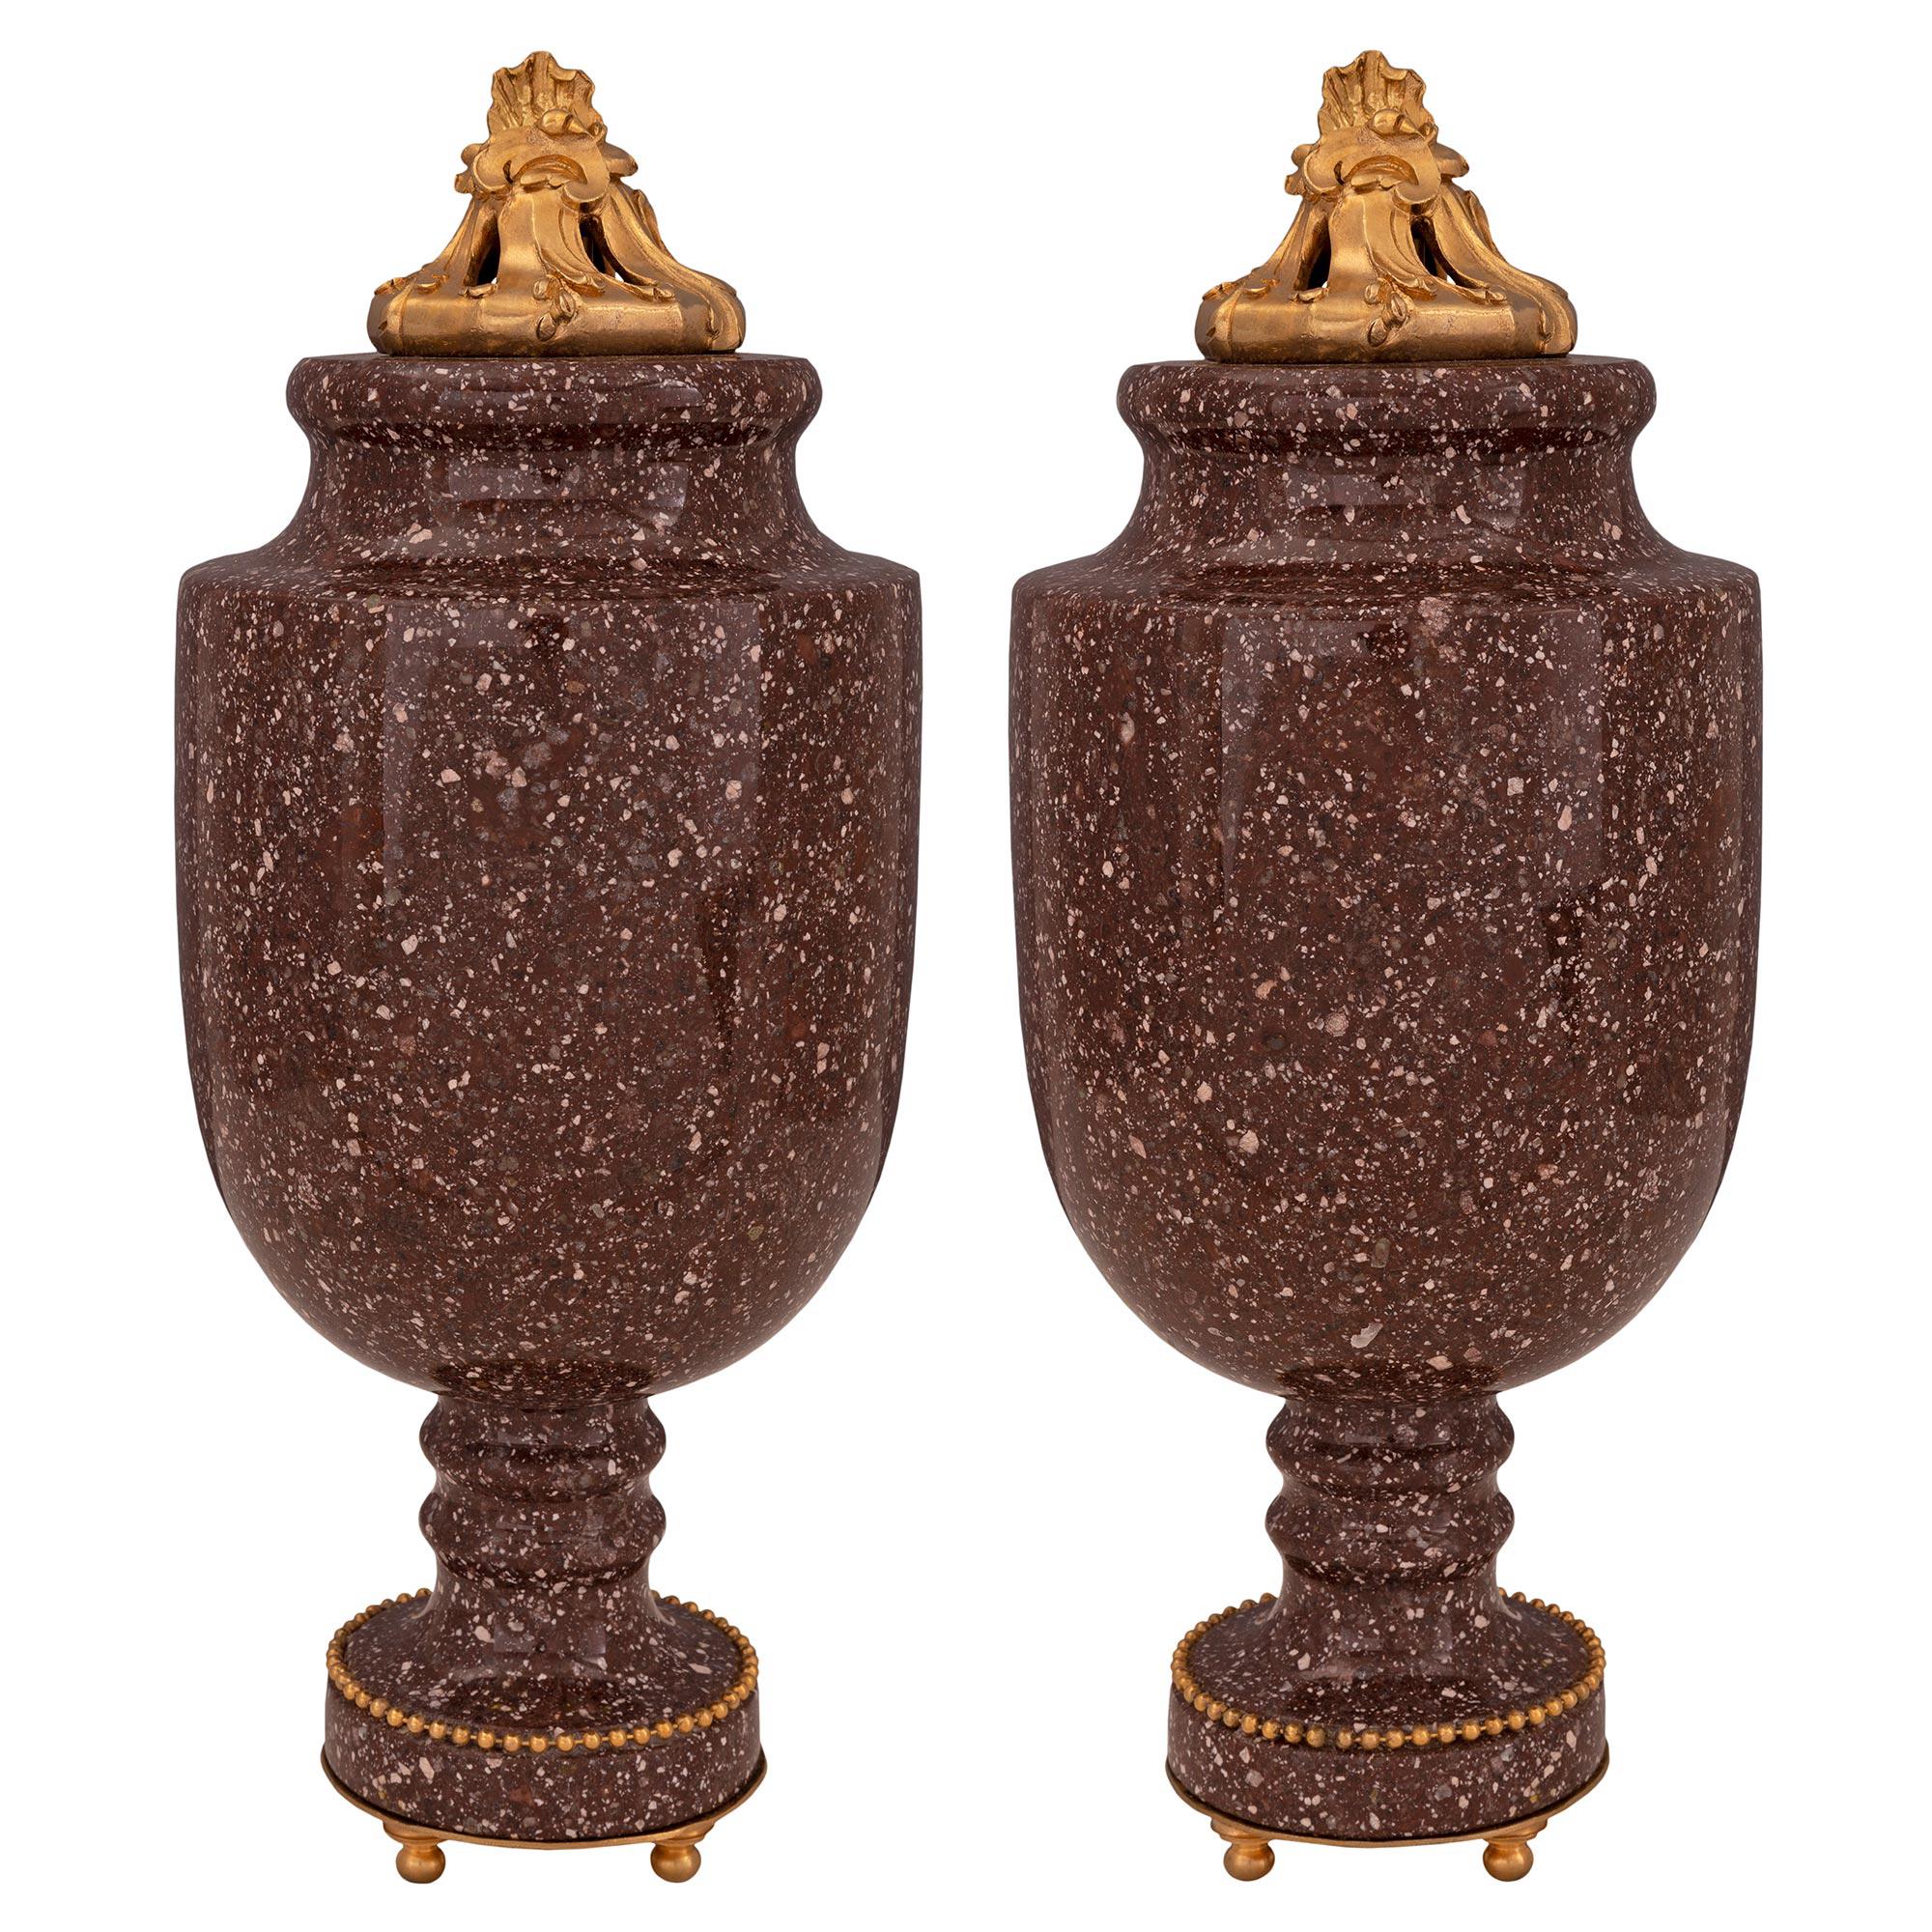 Pair of French 19th Century Neoclassical St. Porphyry and Ormolu Lidded Urns For Sale